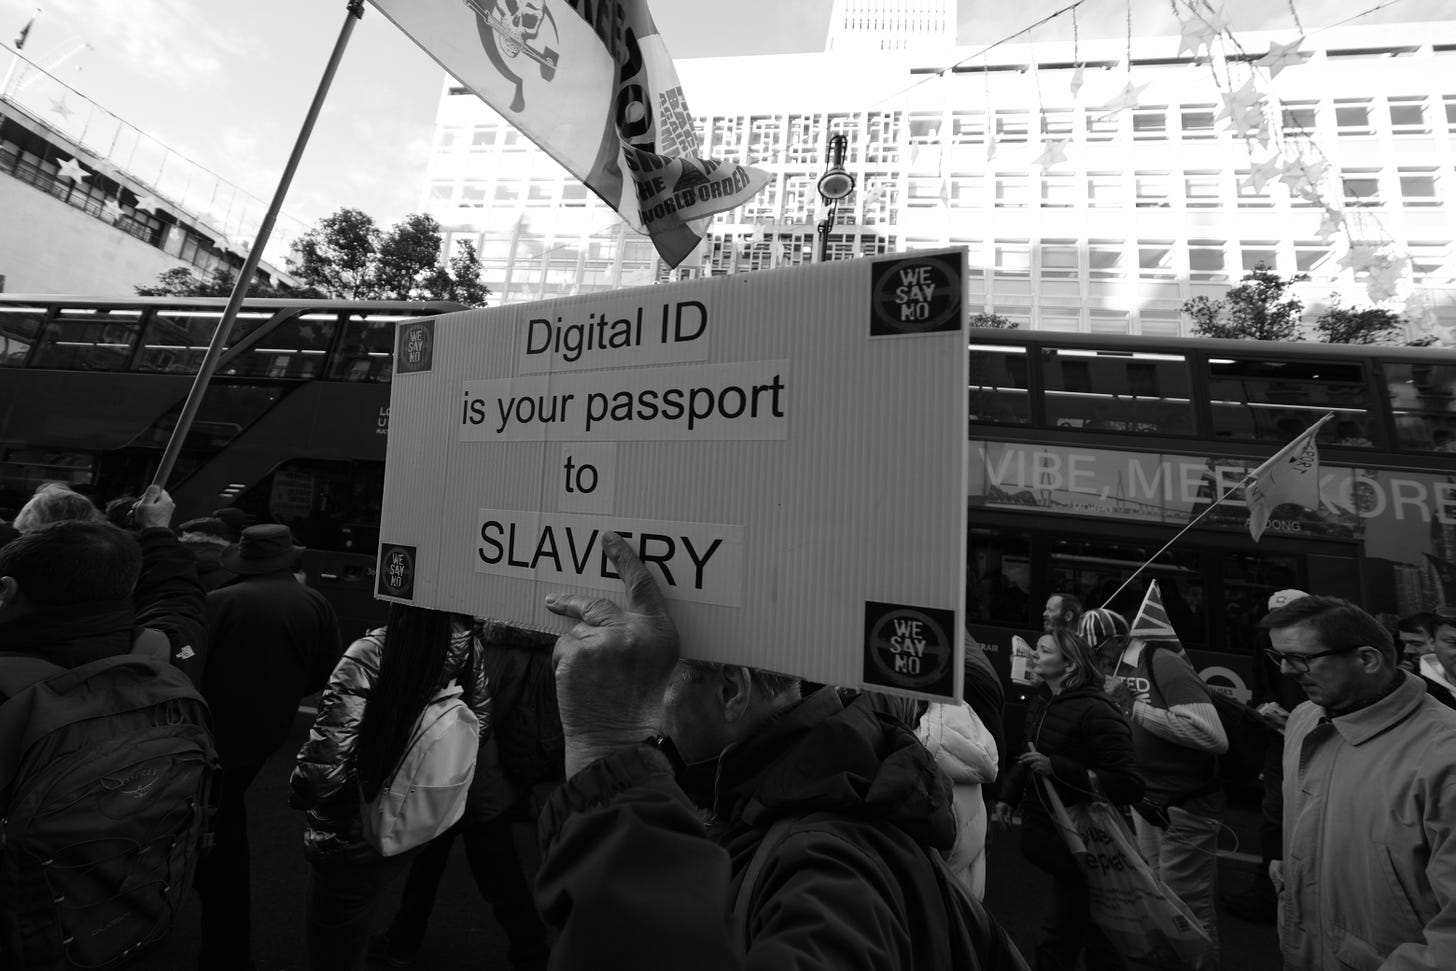 Digital ID is your passport to slavery